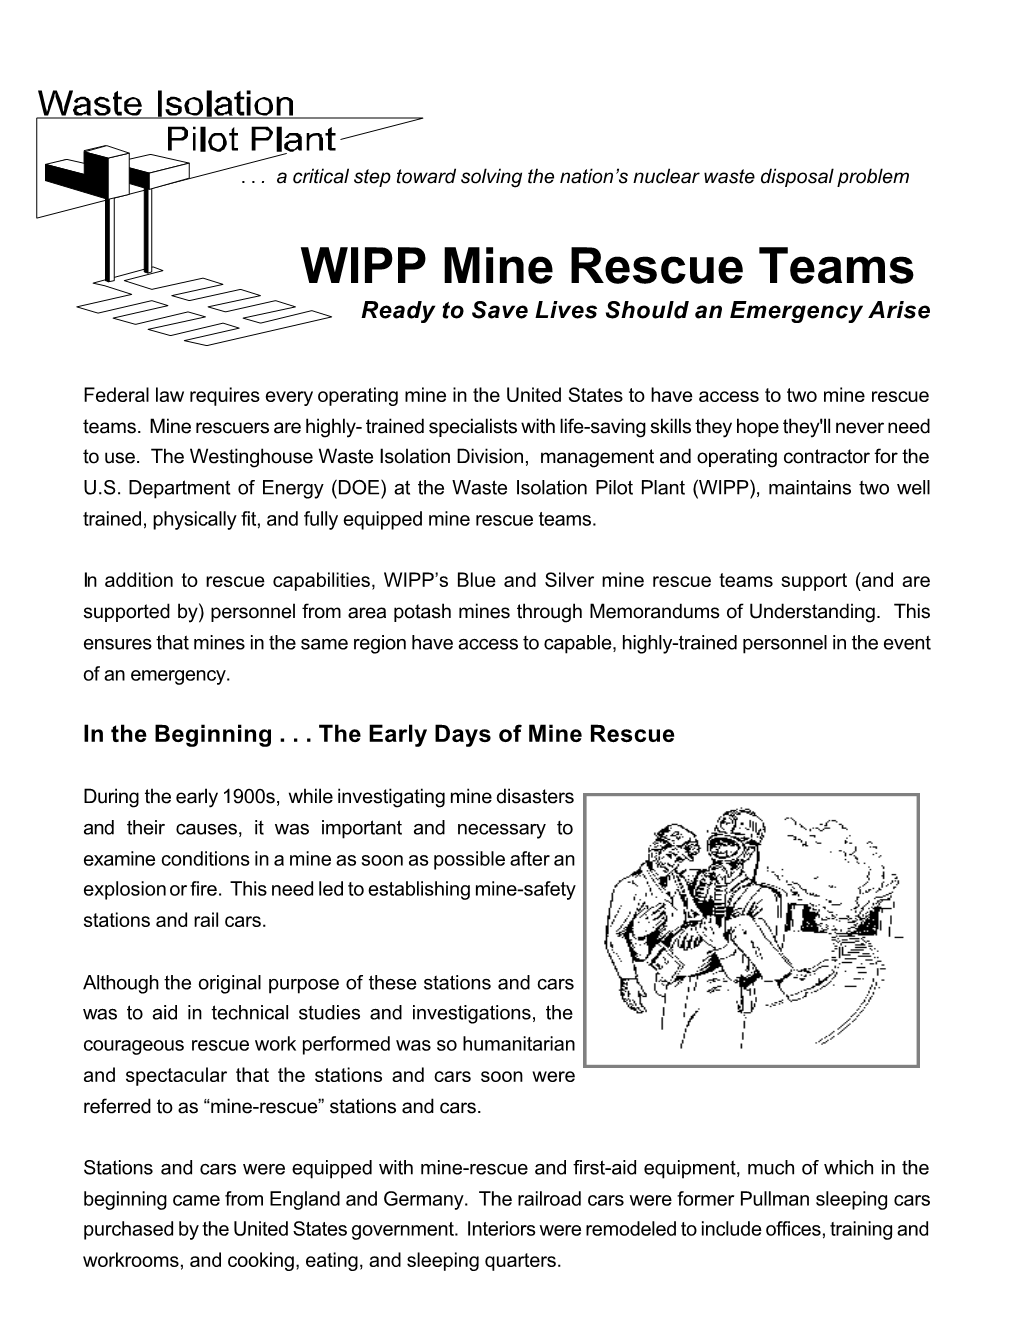 WIPP Mine Rescue Teams: Ready to Save Lives Should and Emergency Arise